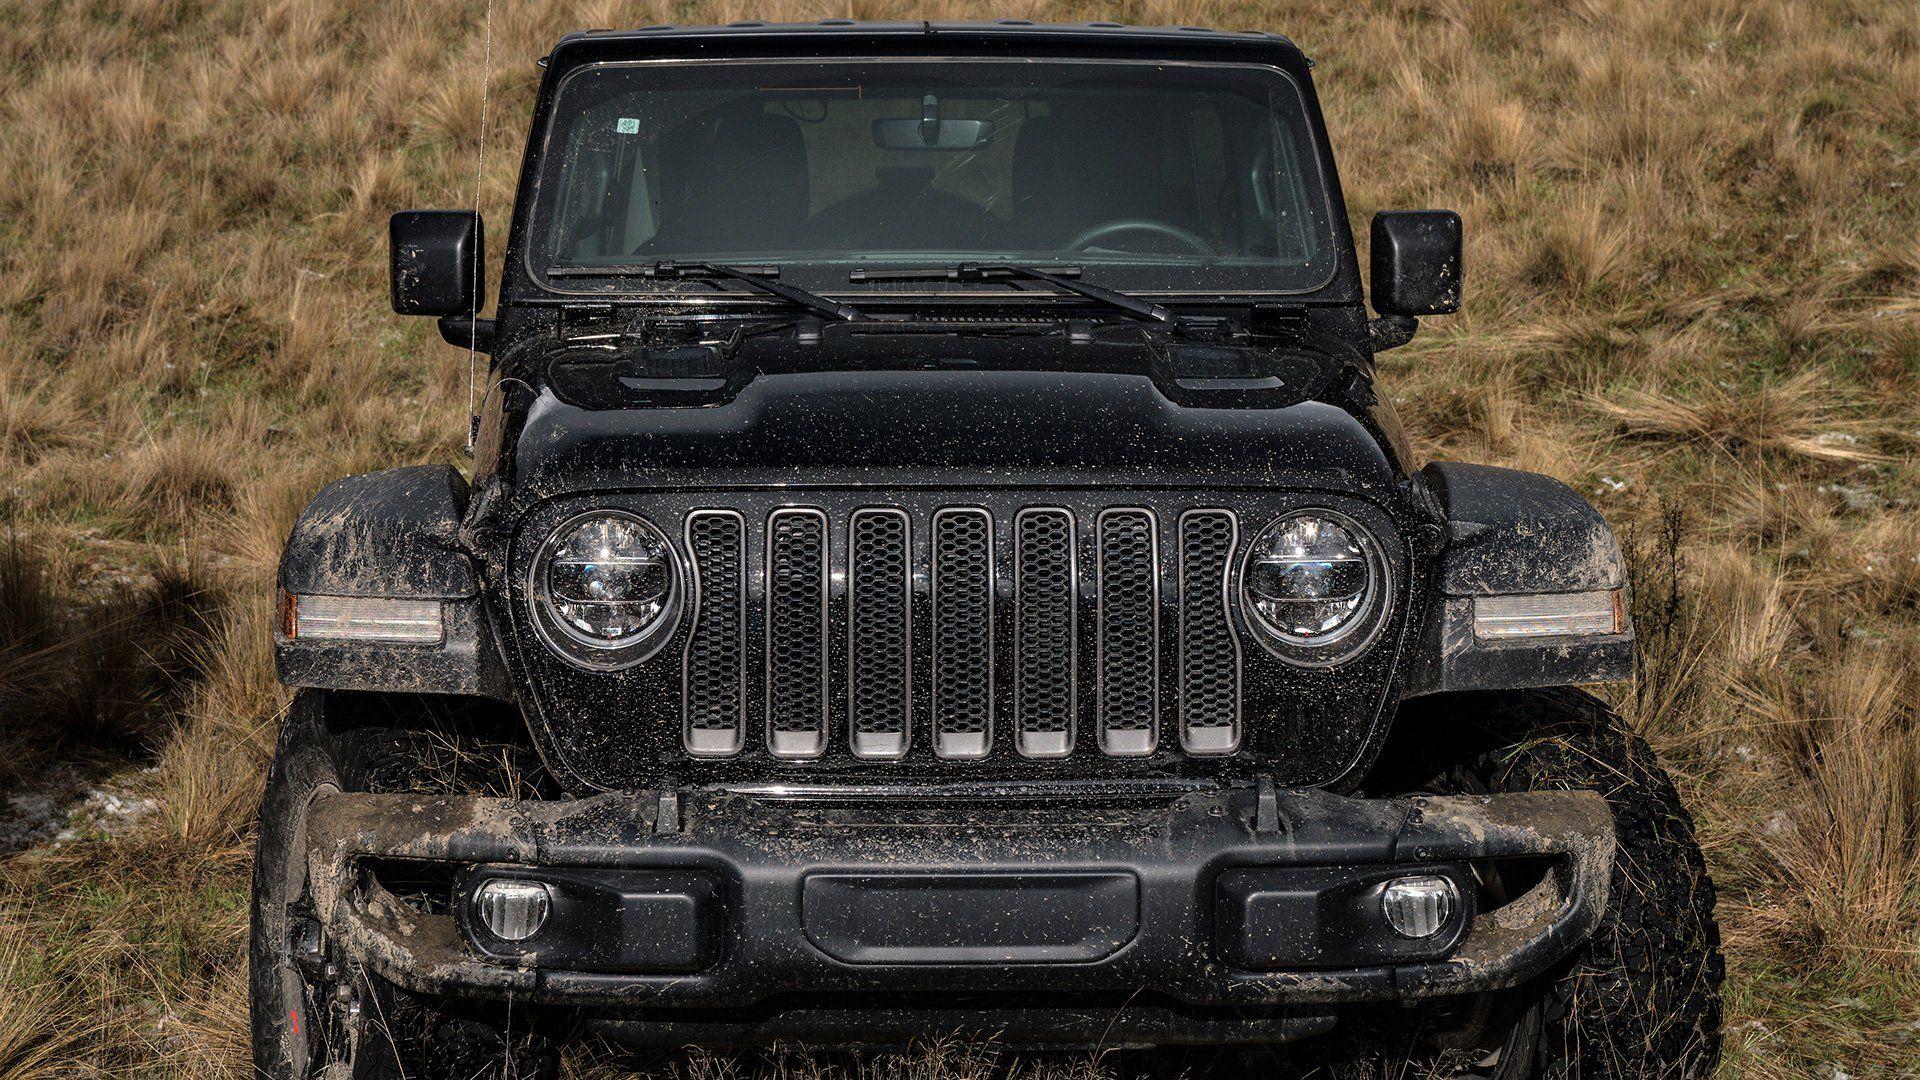 2018 Jeep Wrangler First Drive Review: All